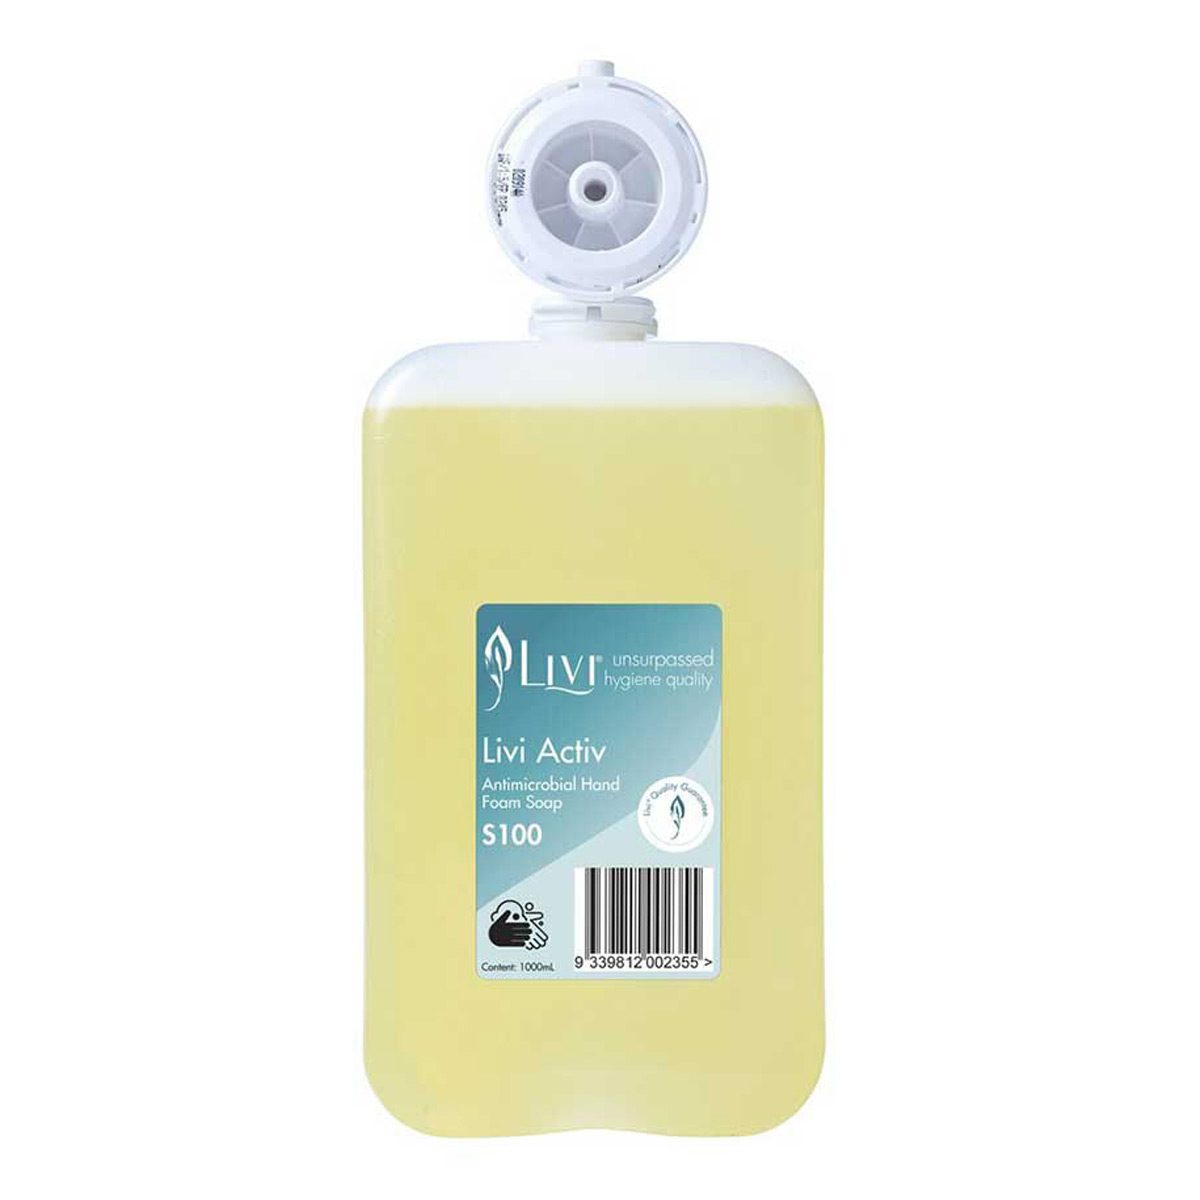 washroom-skincare-hand-soap-livi-anti-microbial-foaming-soap-1L-litre-superior-cost-in-use-savings-anti-microbial-formula-tough-on-germs-geca-certified-leaves-hands-soft-vjs-distributors-S100